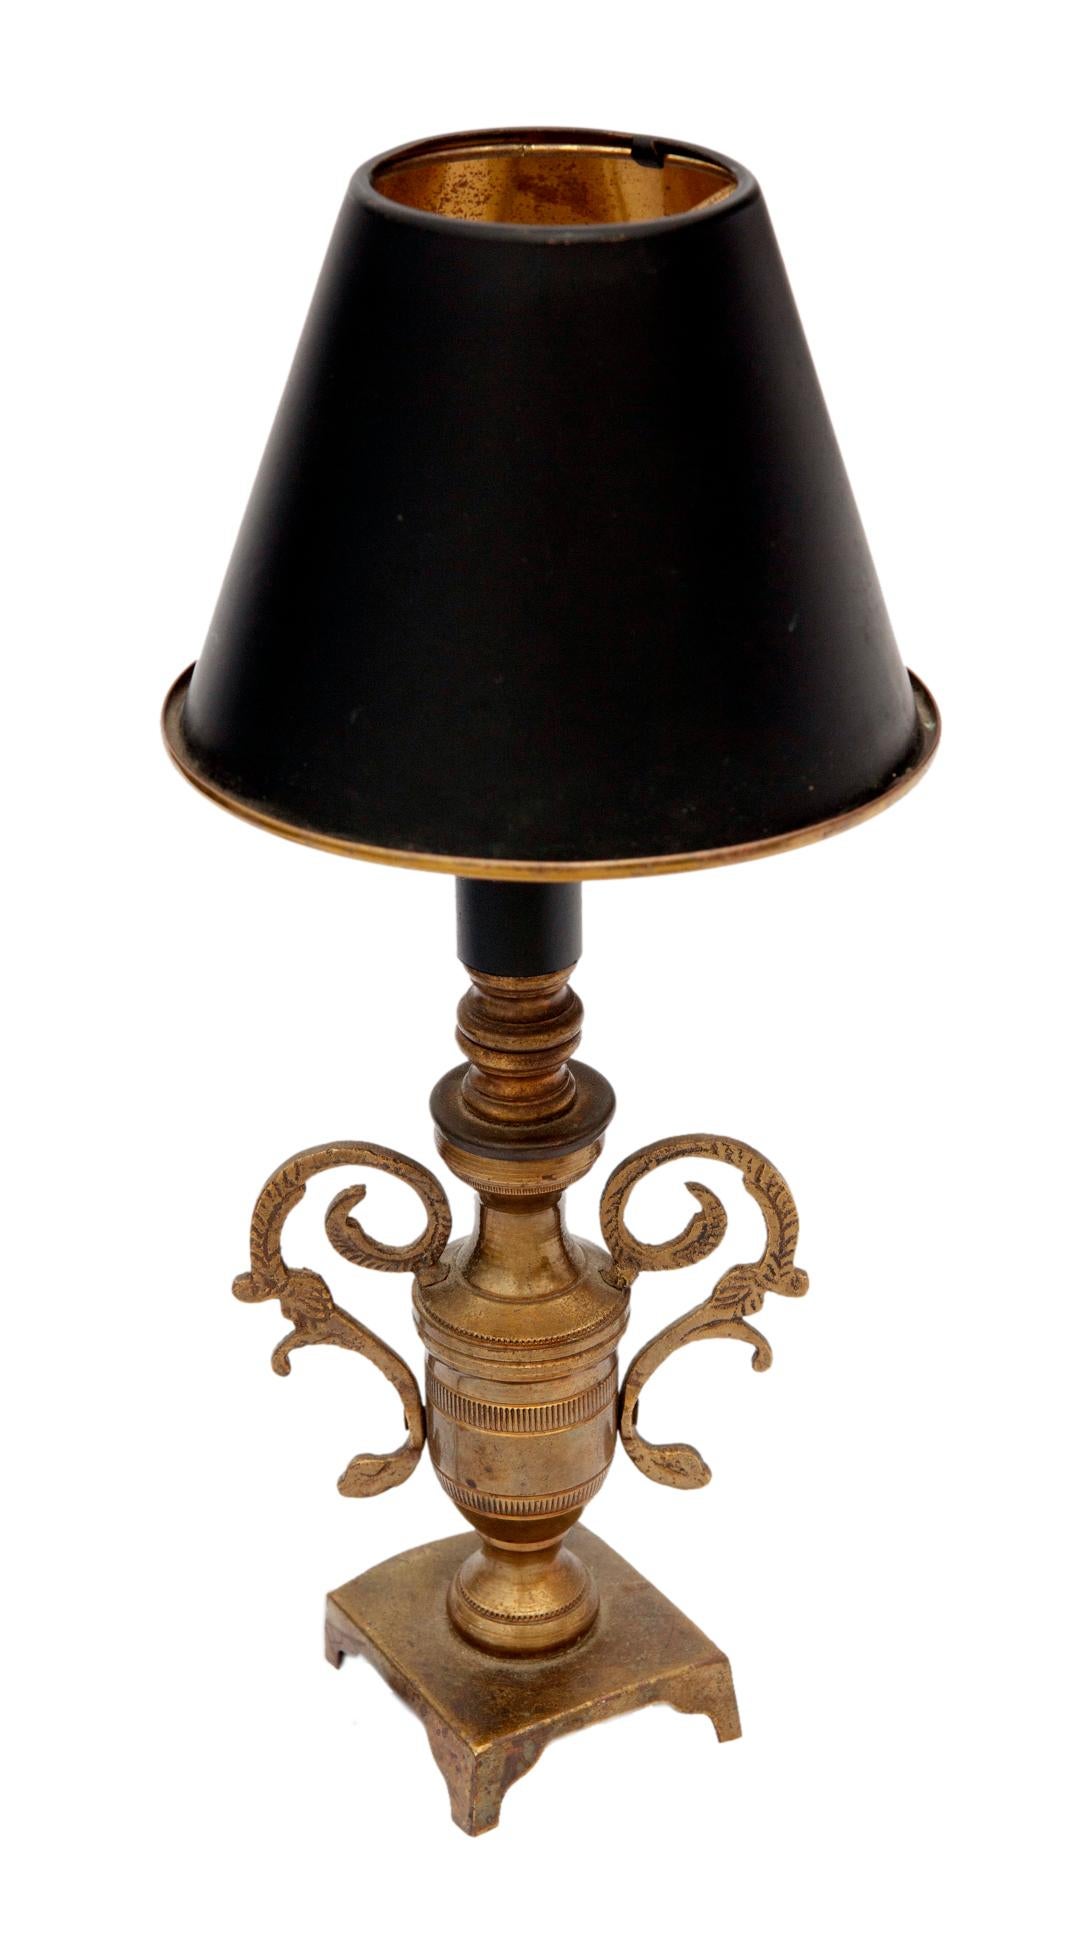 Petite night light/accent lamp in brass with a black metal shade included. The lamp has ornate arms, the shade has a rolled edge in brass. 
Takes a standard chandelier bulb. The switch is on the cord.